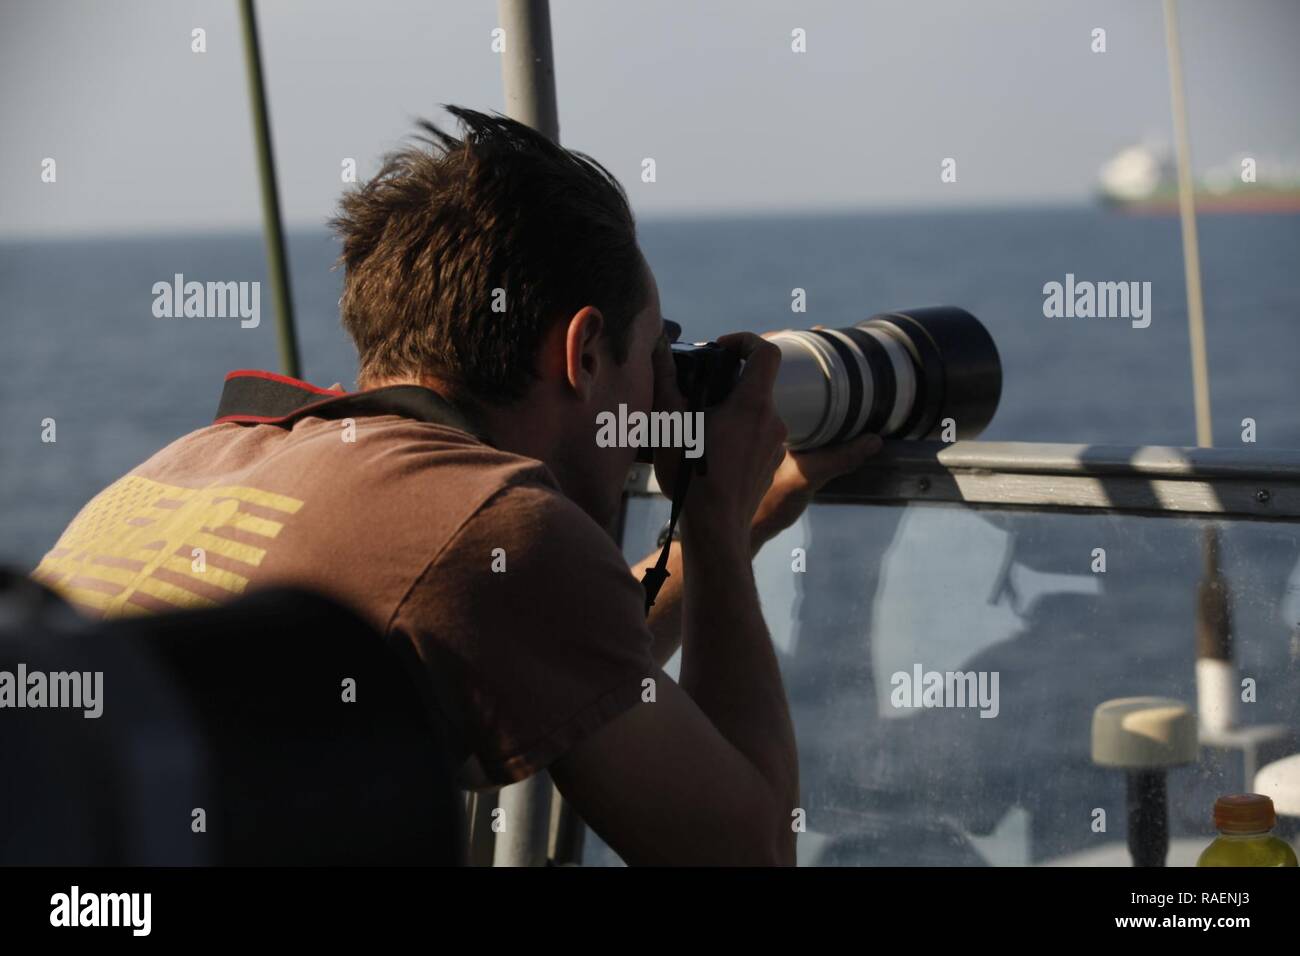 GULF OF OMAN (Dec. 14, 2018) A Sailor aboard the Cyclone-class coastal patrol ship USS Thunderbolt (PC 12) captures photographs of ship activity in the Gulf of Oman. Thunderbolt is deployed to the U.S. 5th Fleet area of operations in support of naval operations to ensure maritime stability and security in the Central Region, connecting the Mediterranean and the Pacific through the western Indian Ocean and three strategic choke points. Stock Photo